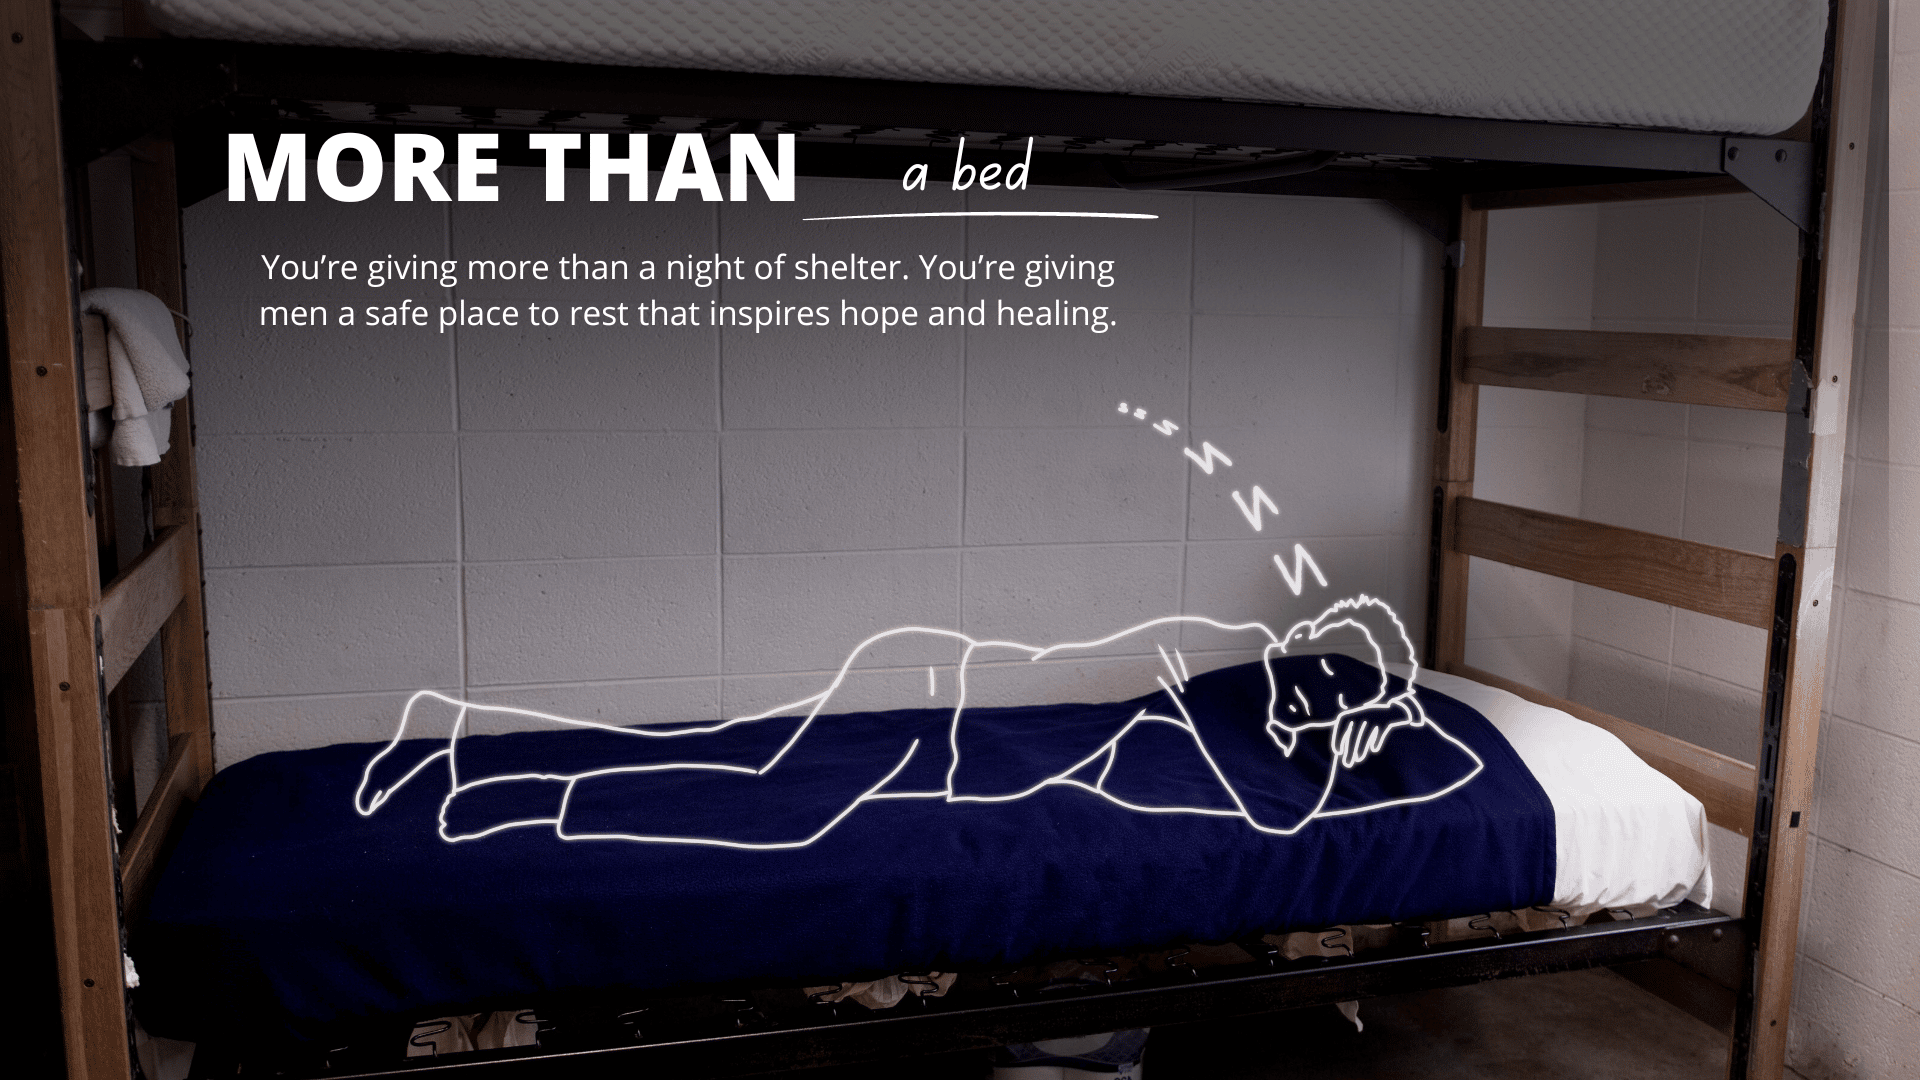 More than a bed: You’re giving men a safe place to rest that inspires hope and healing.